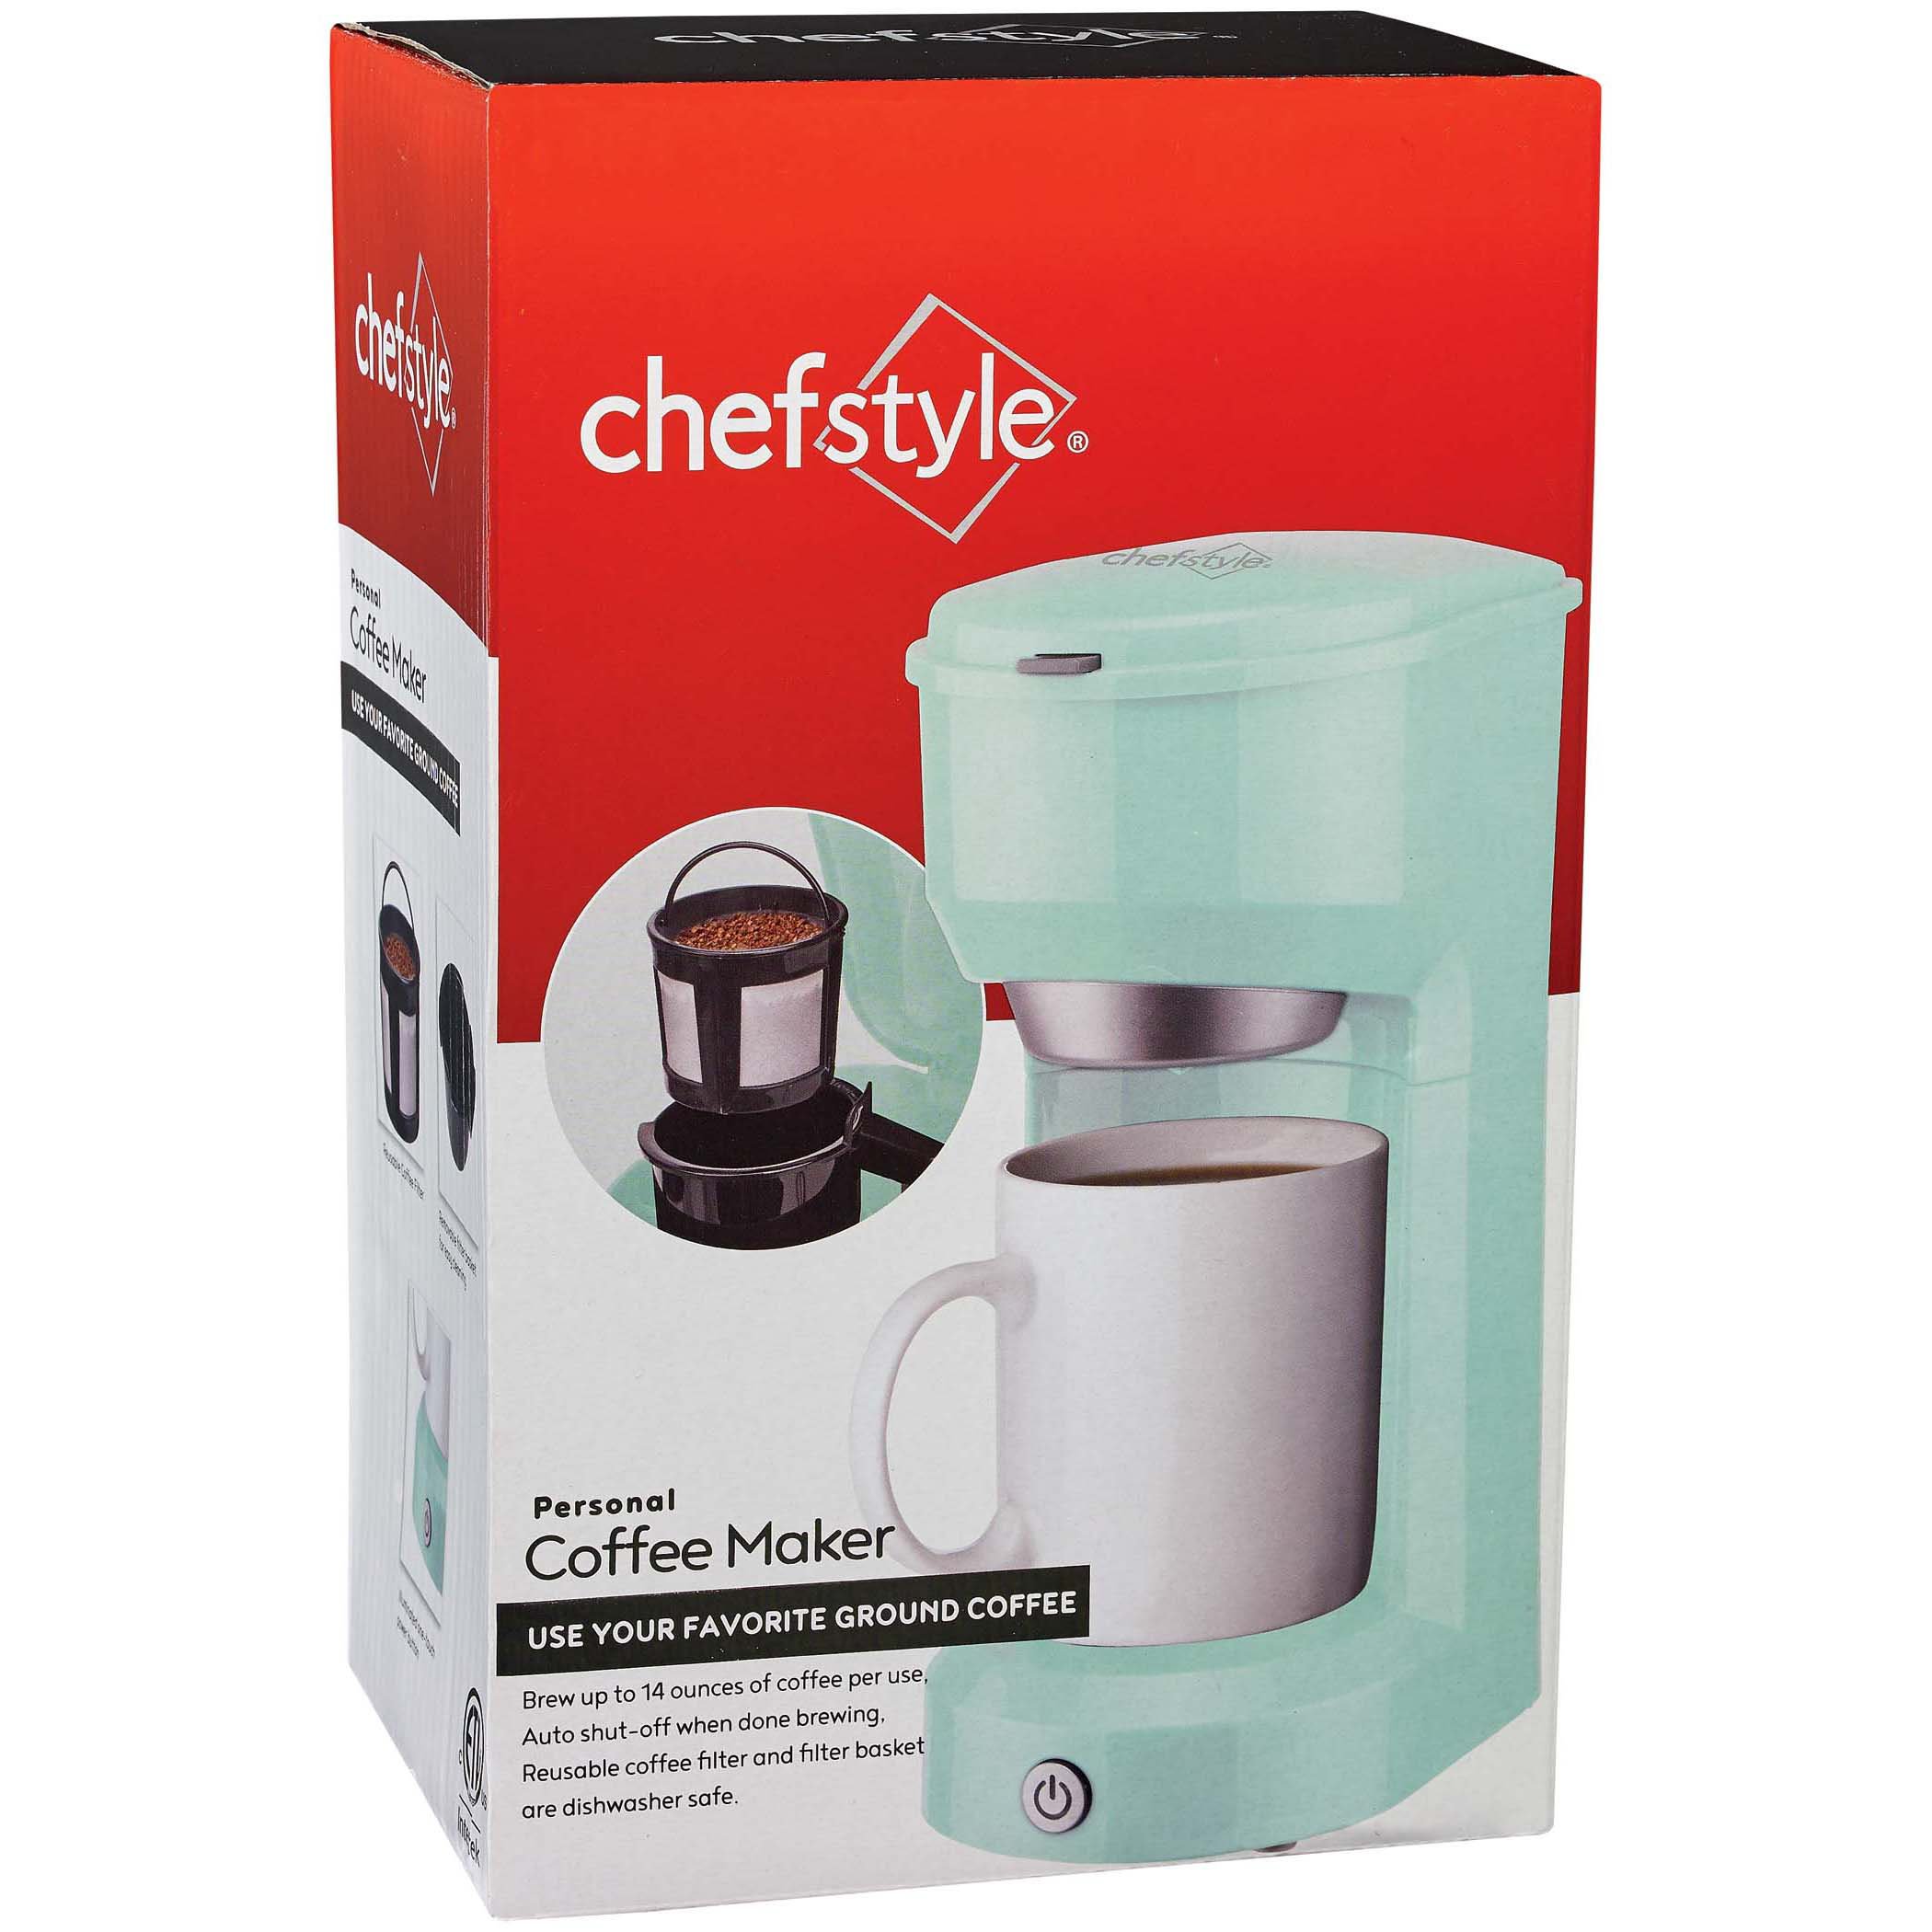 chefstyle Personal Coffee Maker – Mint